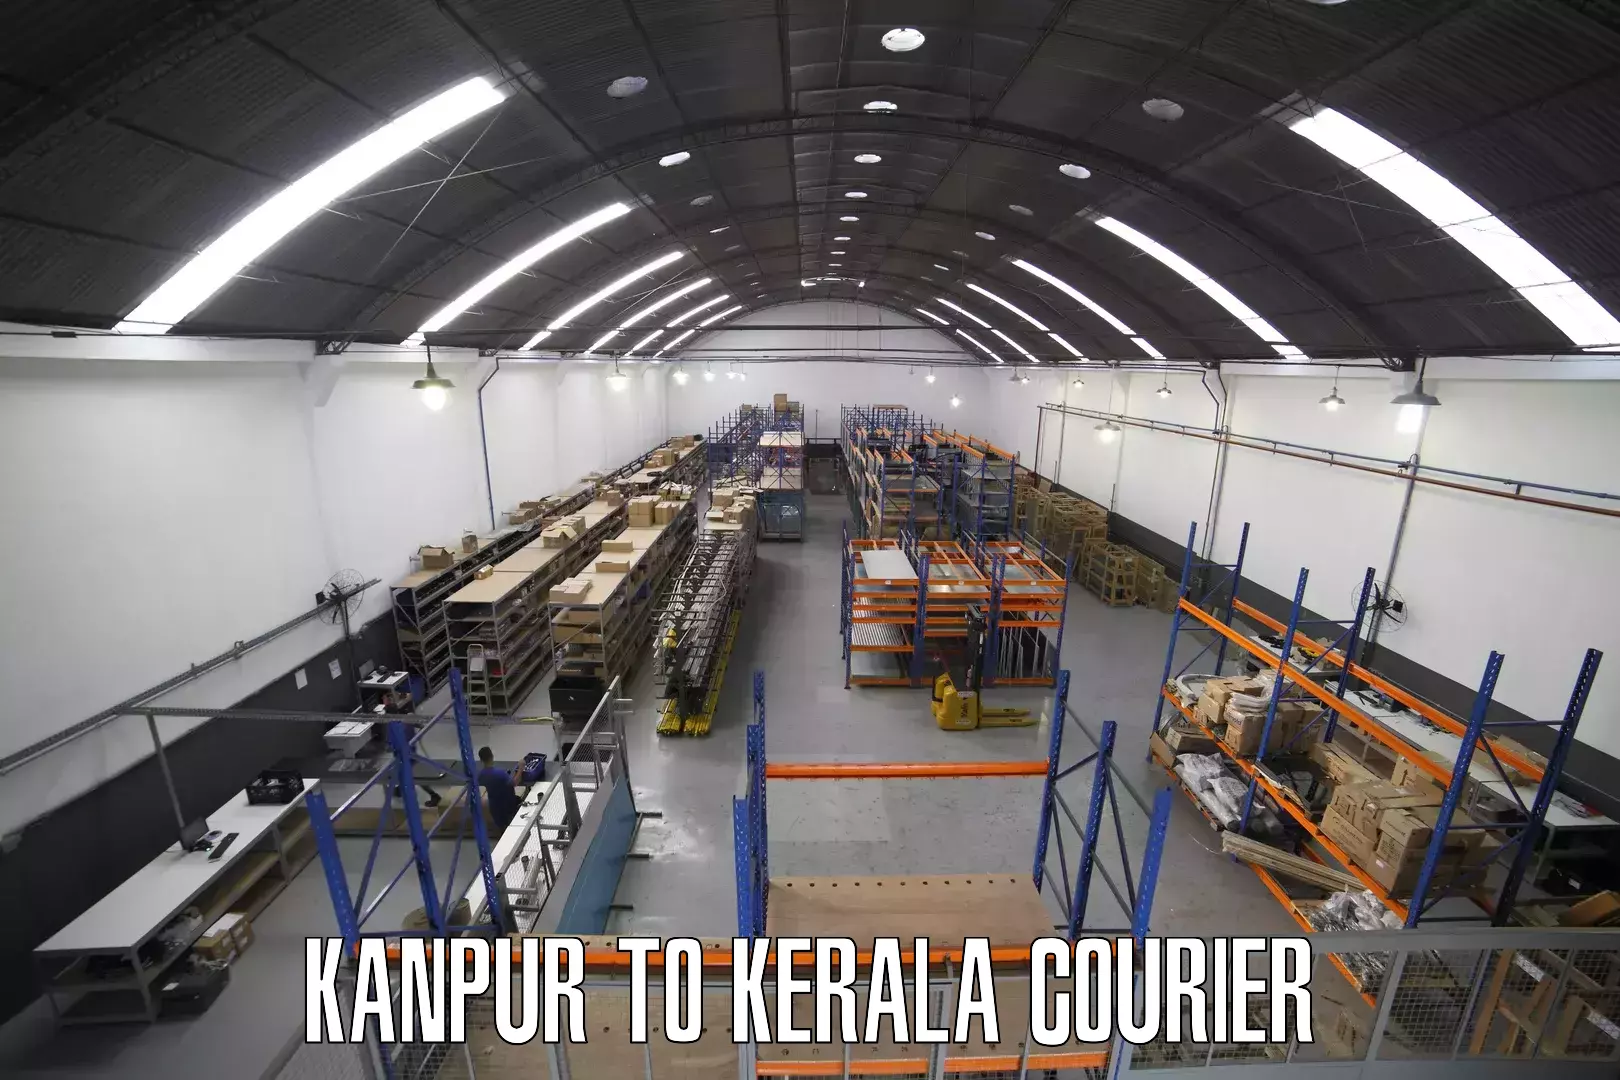 International courier networks Kanpur to Calicut